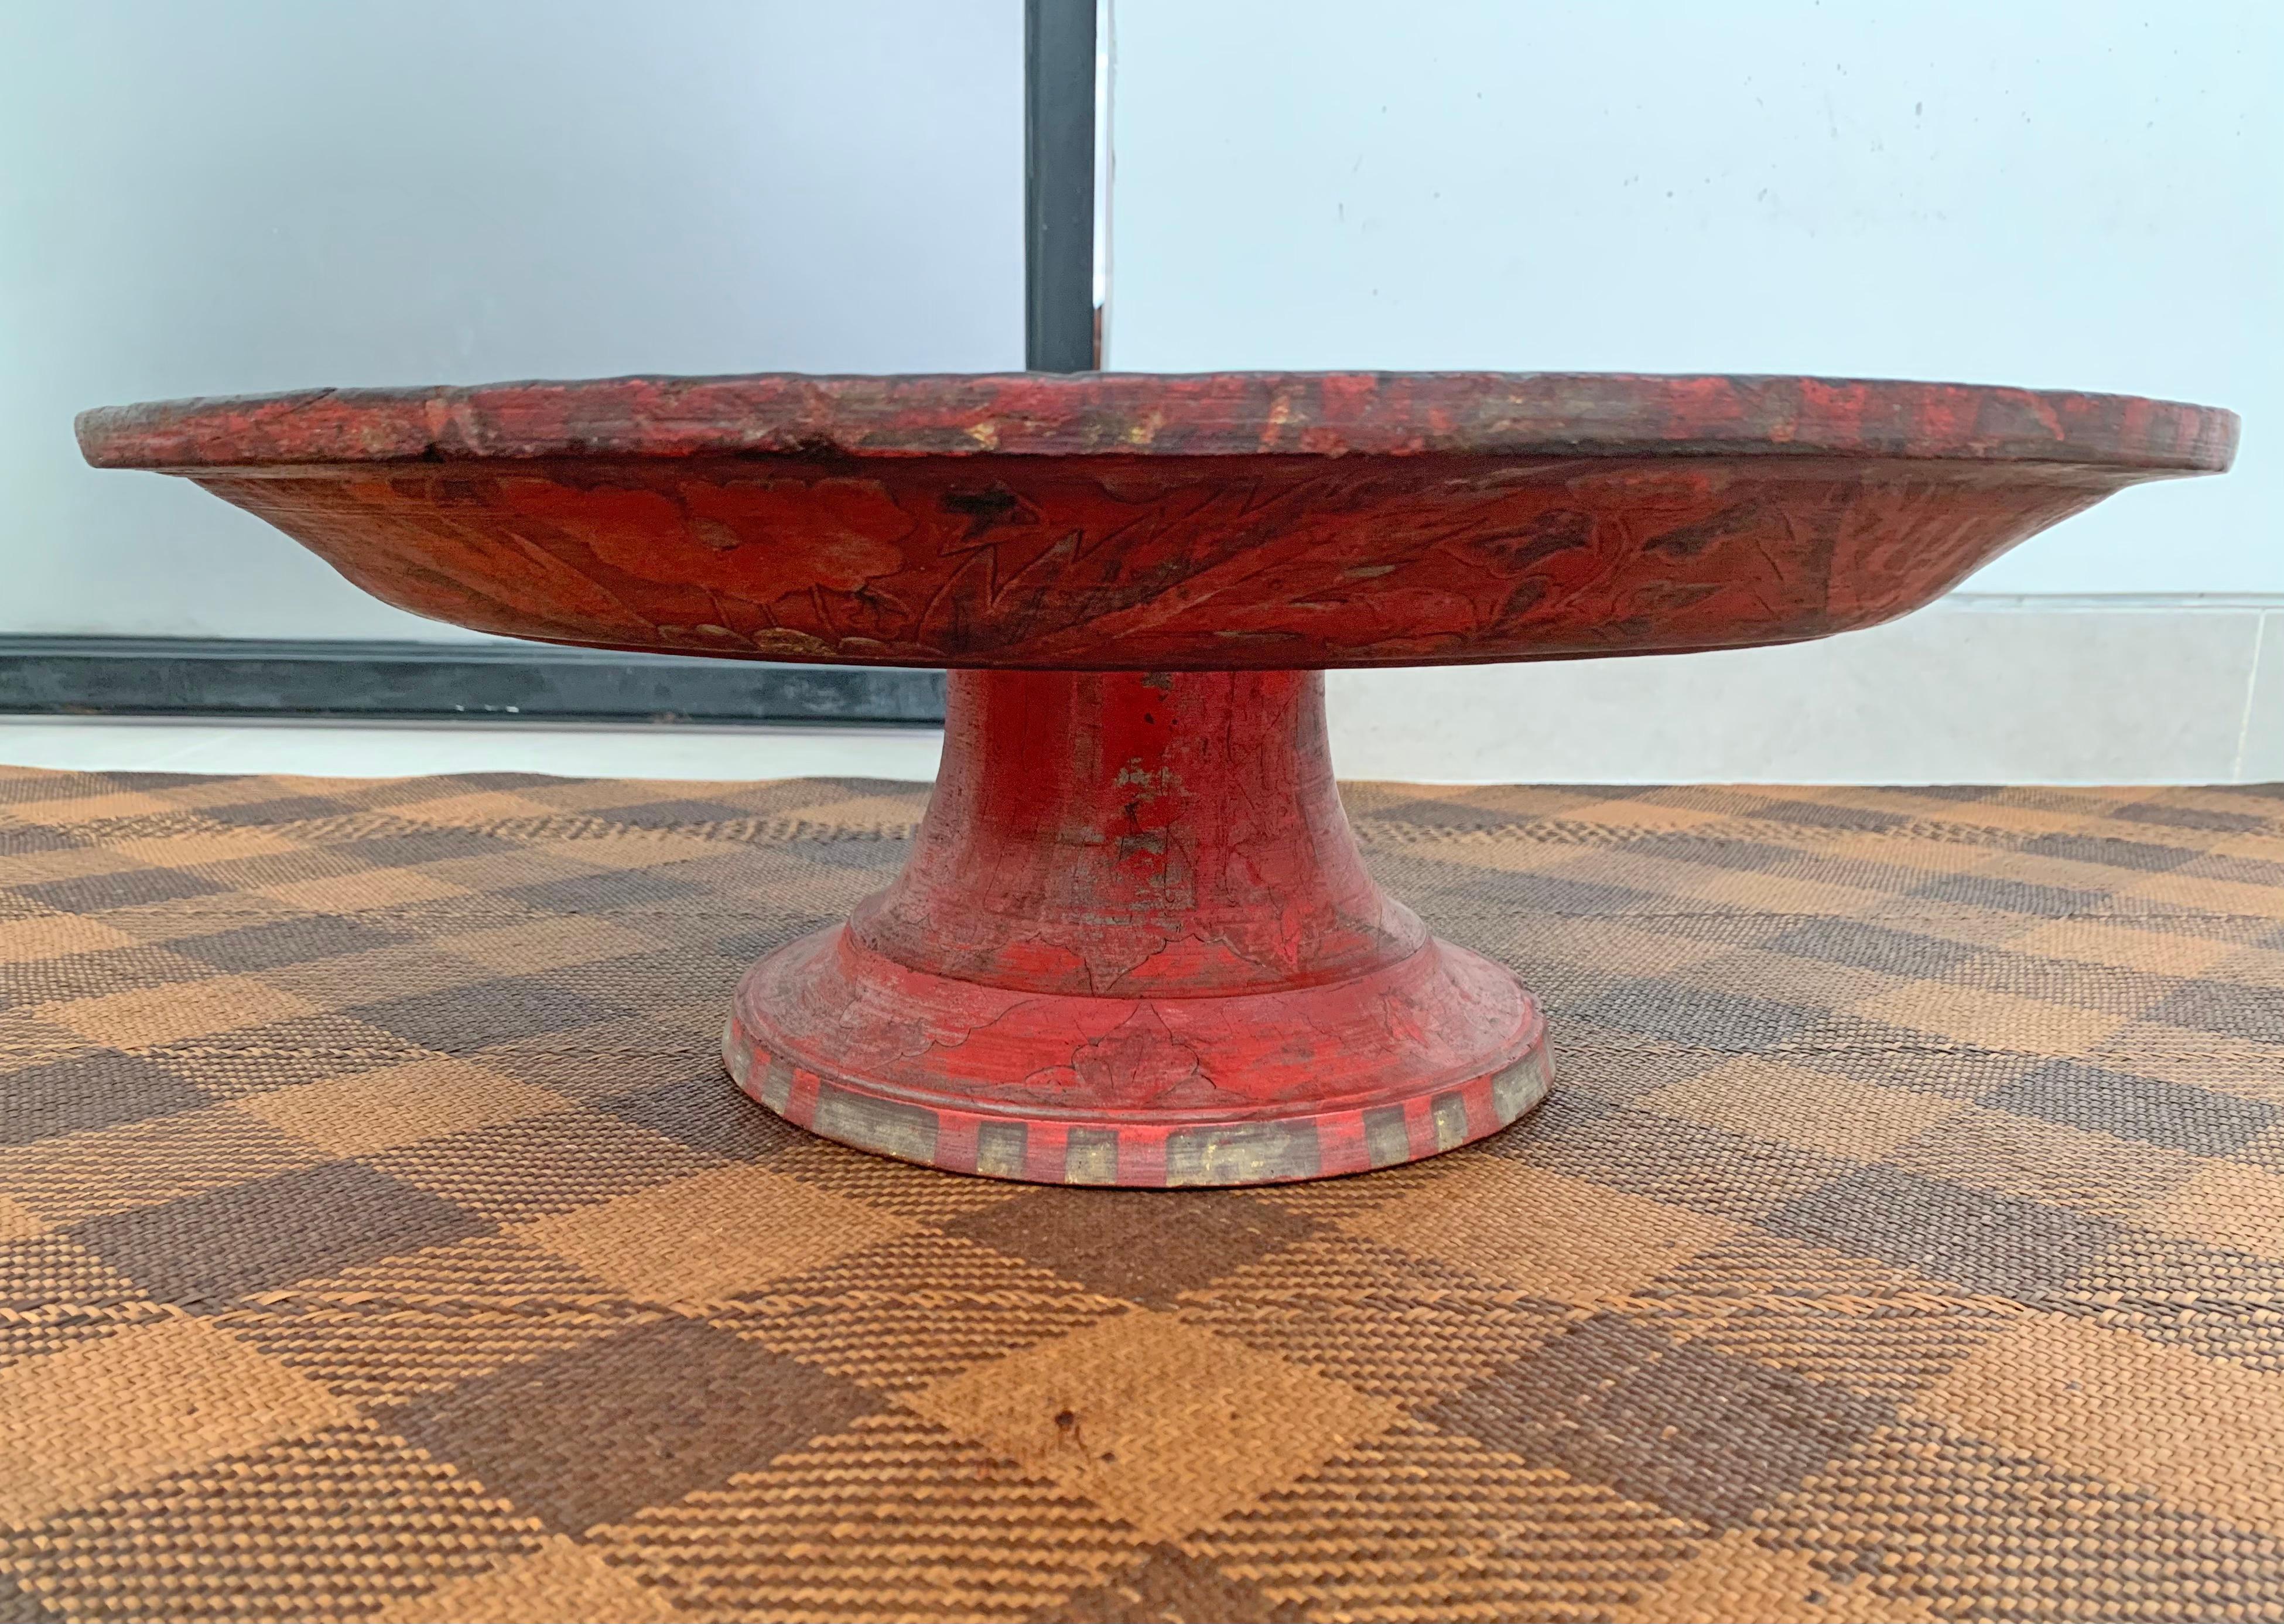 Balinese Temple Offering Tray / Bowl 'Dulang' Floral Motifs & Red Polychrome For Sale 2